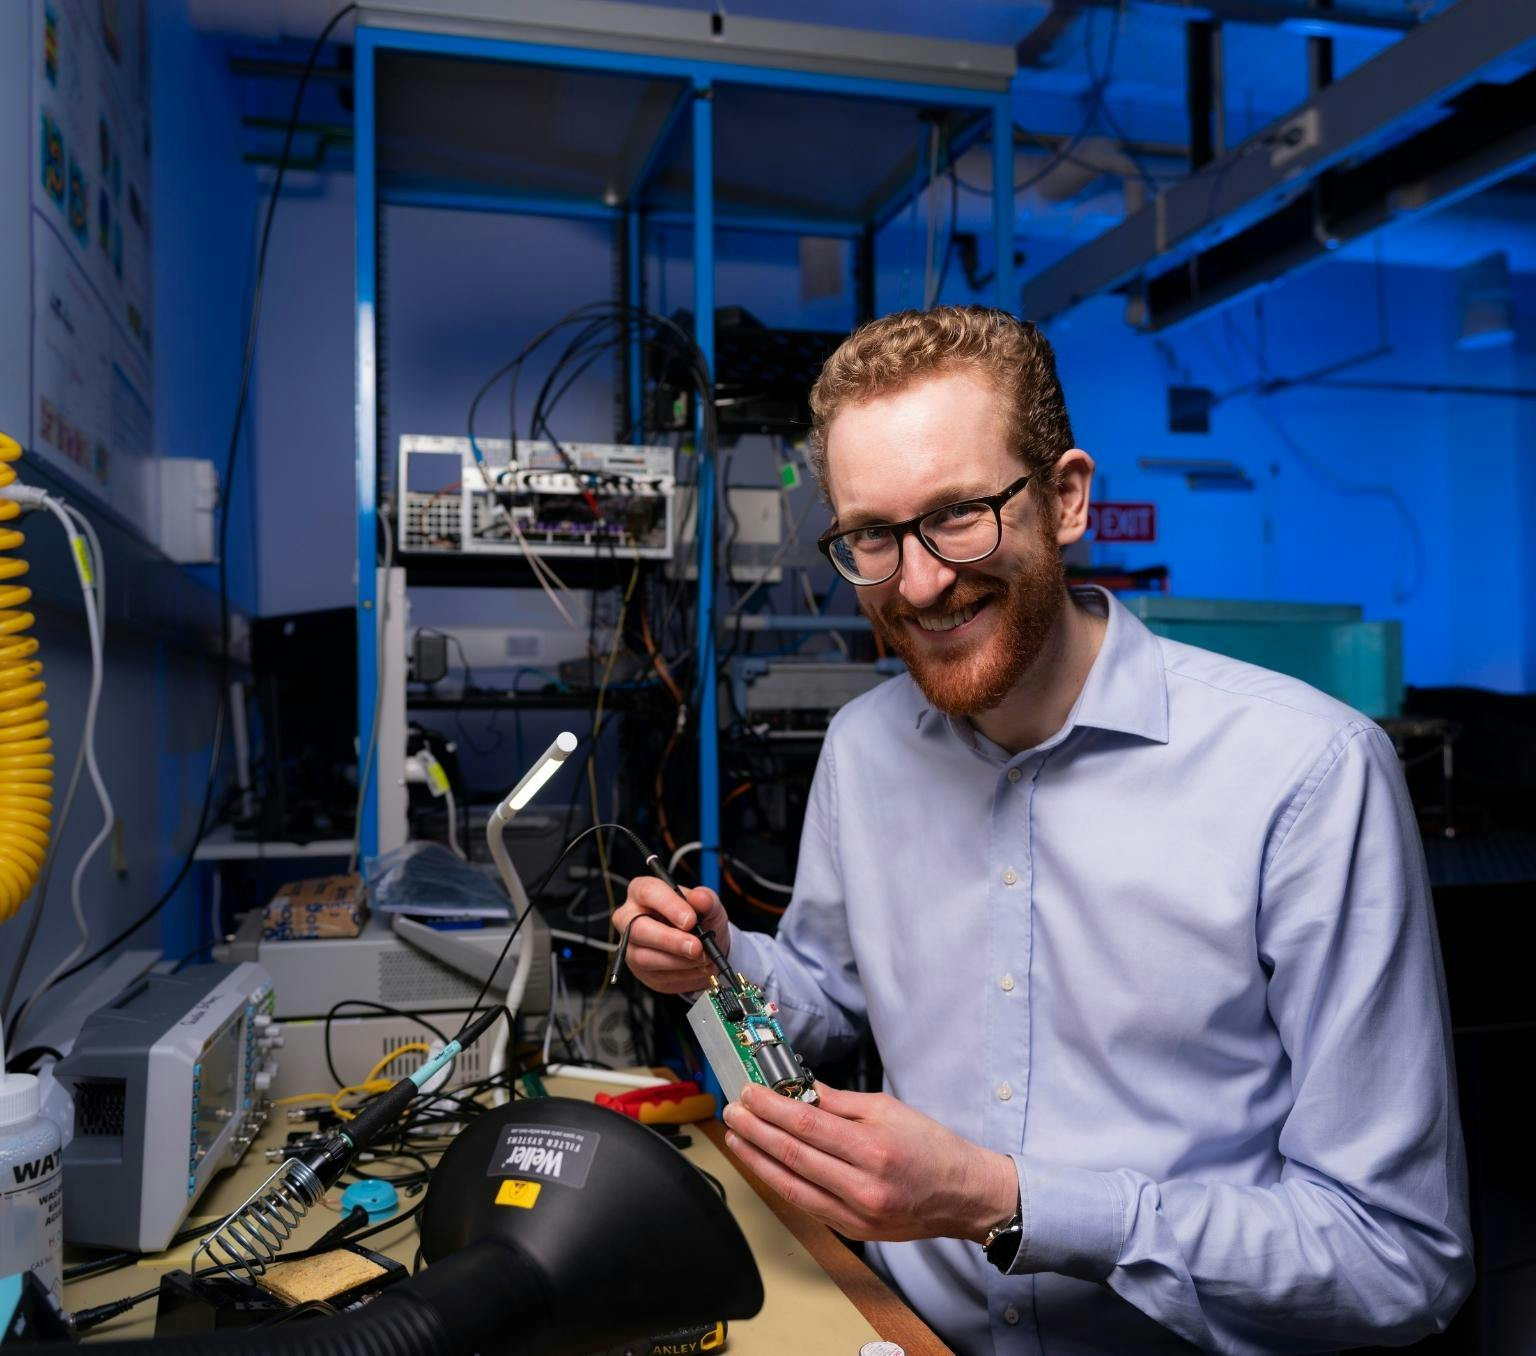 Andrew Horsley is wearing a blue collared shirt and black glasses. he is smiling at the camera and holding a small box covered in buttons and wires. He is in a room filled with various technology items and blue light.